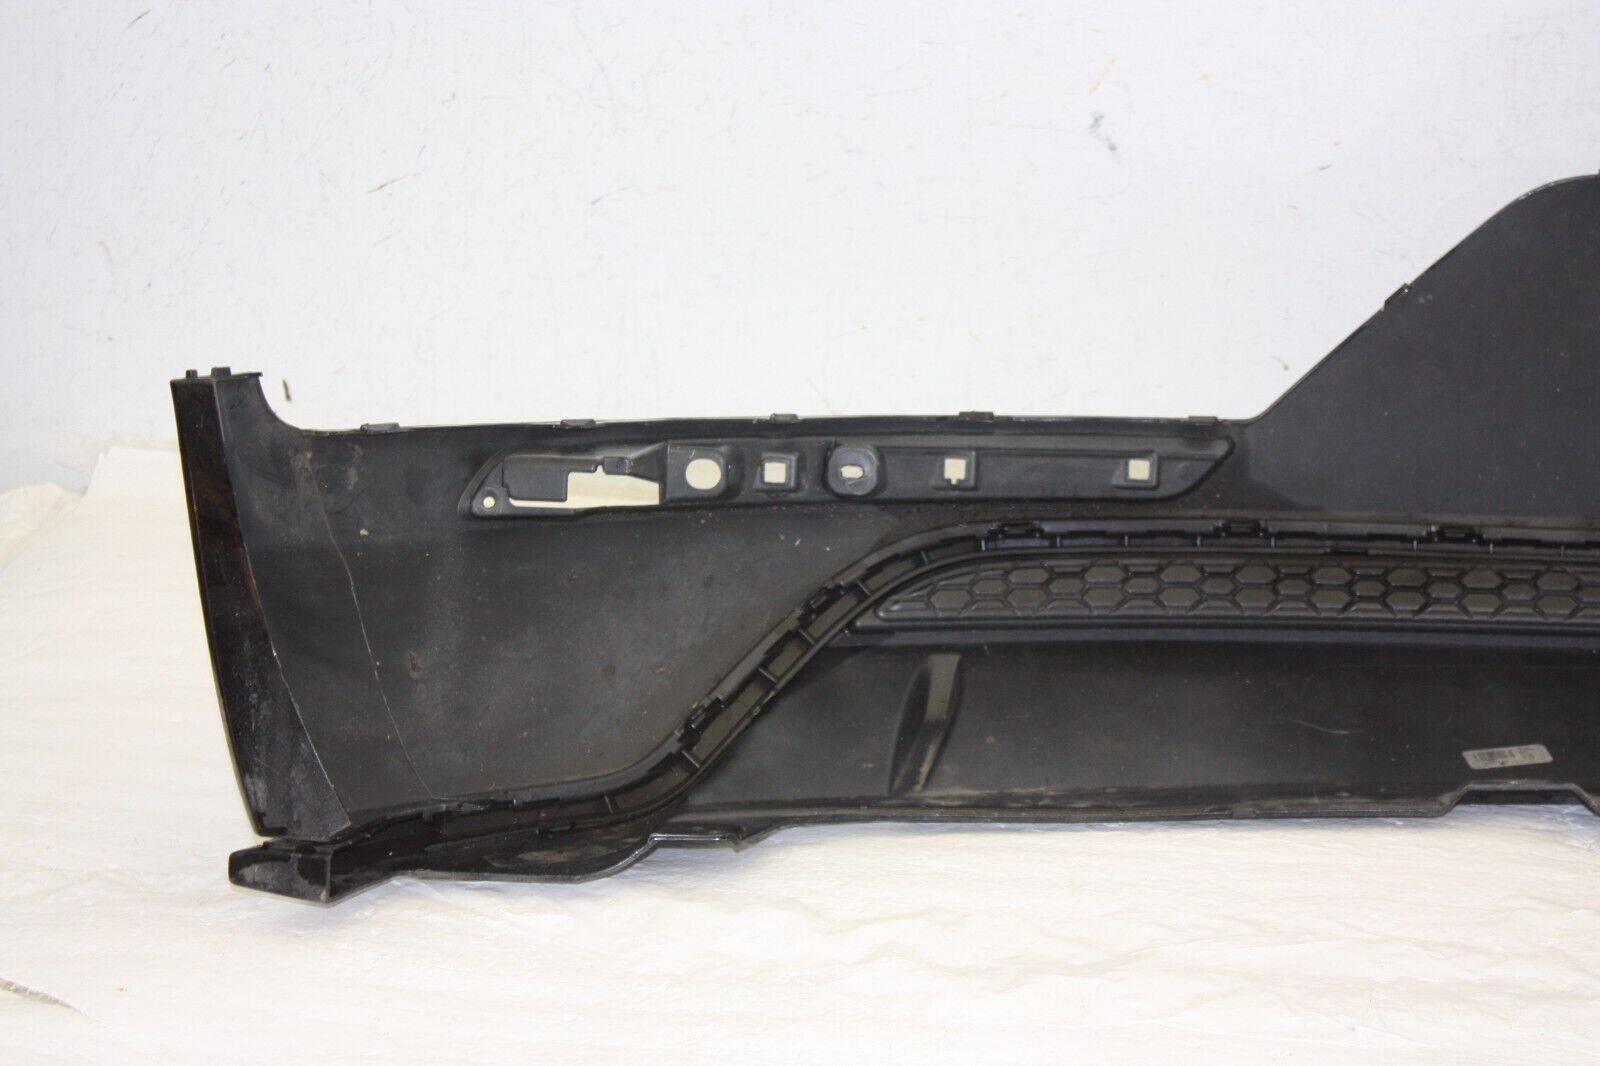 VW-Beetle-Rear-Bumper-Lower-Section-2016-To-2018-5C5807521F-Genuine-176265870899-17